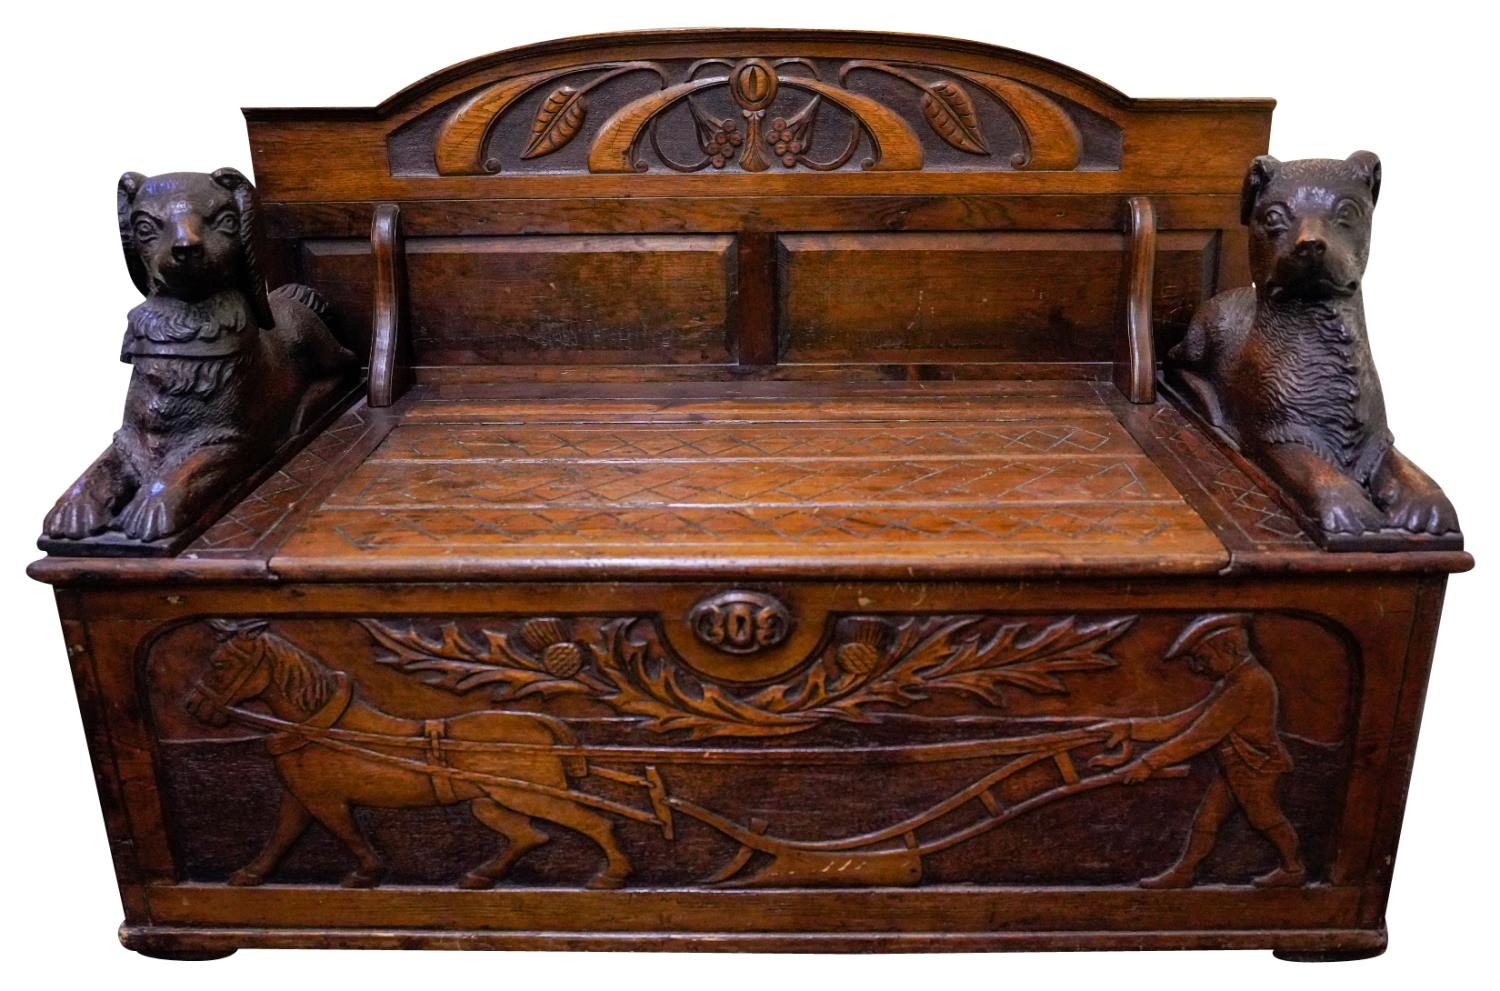 CARVED STAINED SOFTWOOD 'BLACKFOREST' HALL BENCH WITH 19TH CENTURY ELEMENTS the arched panelled back